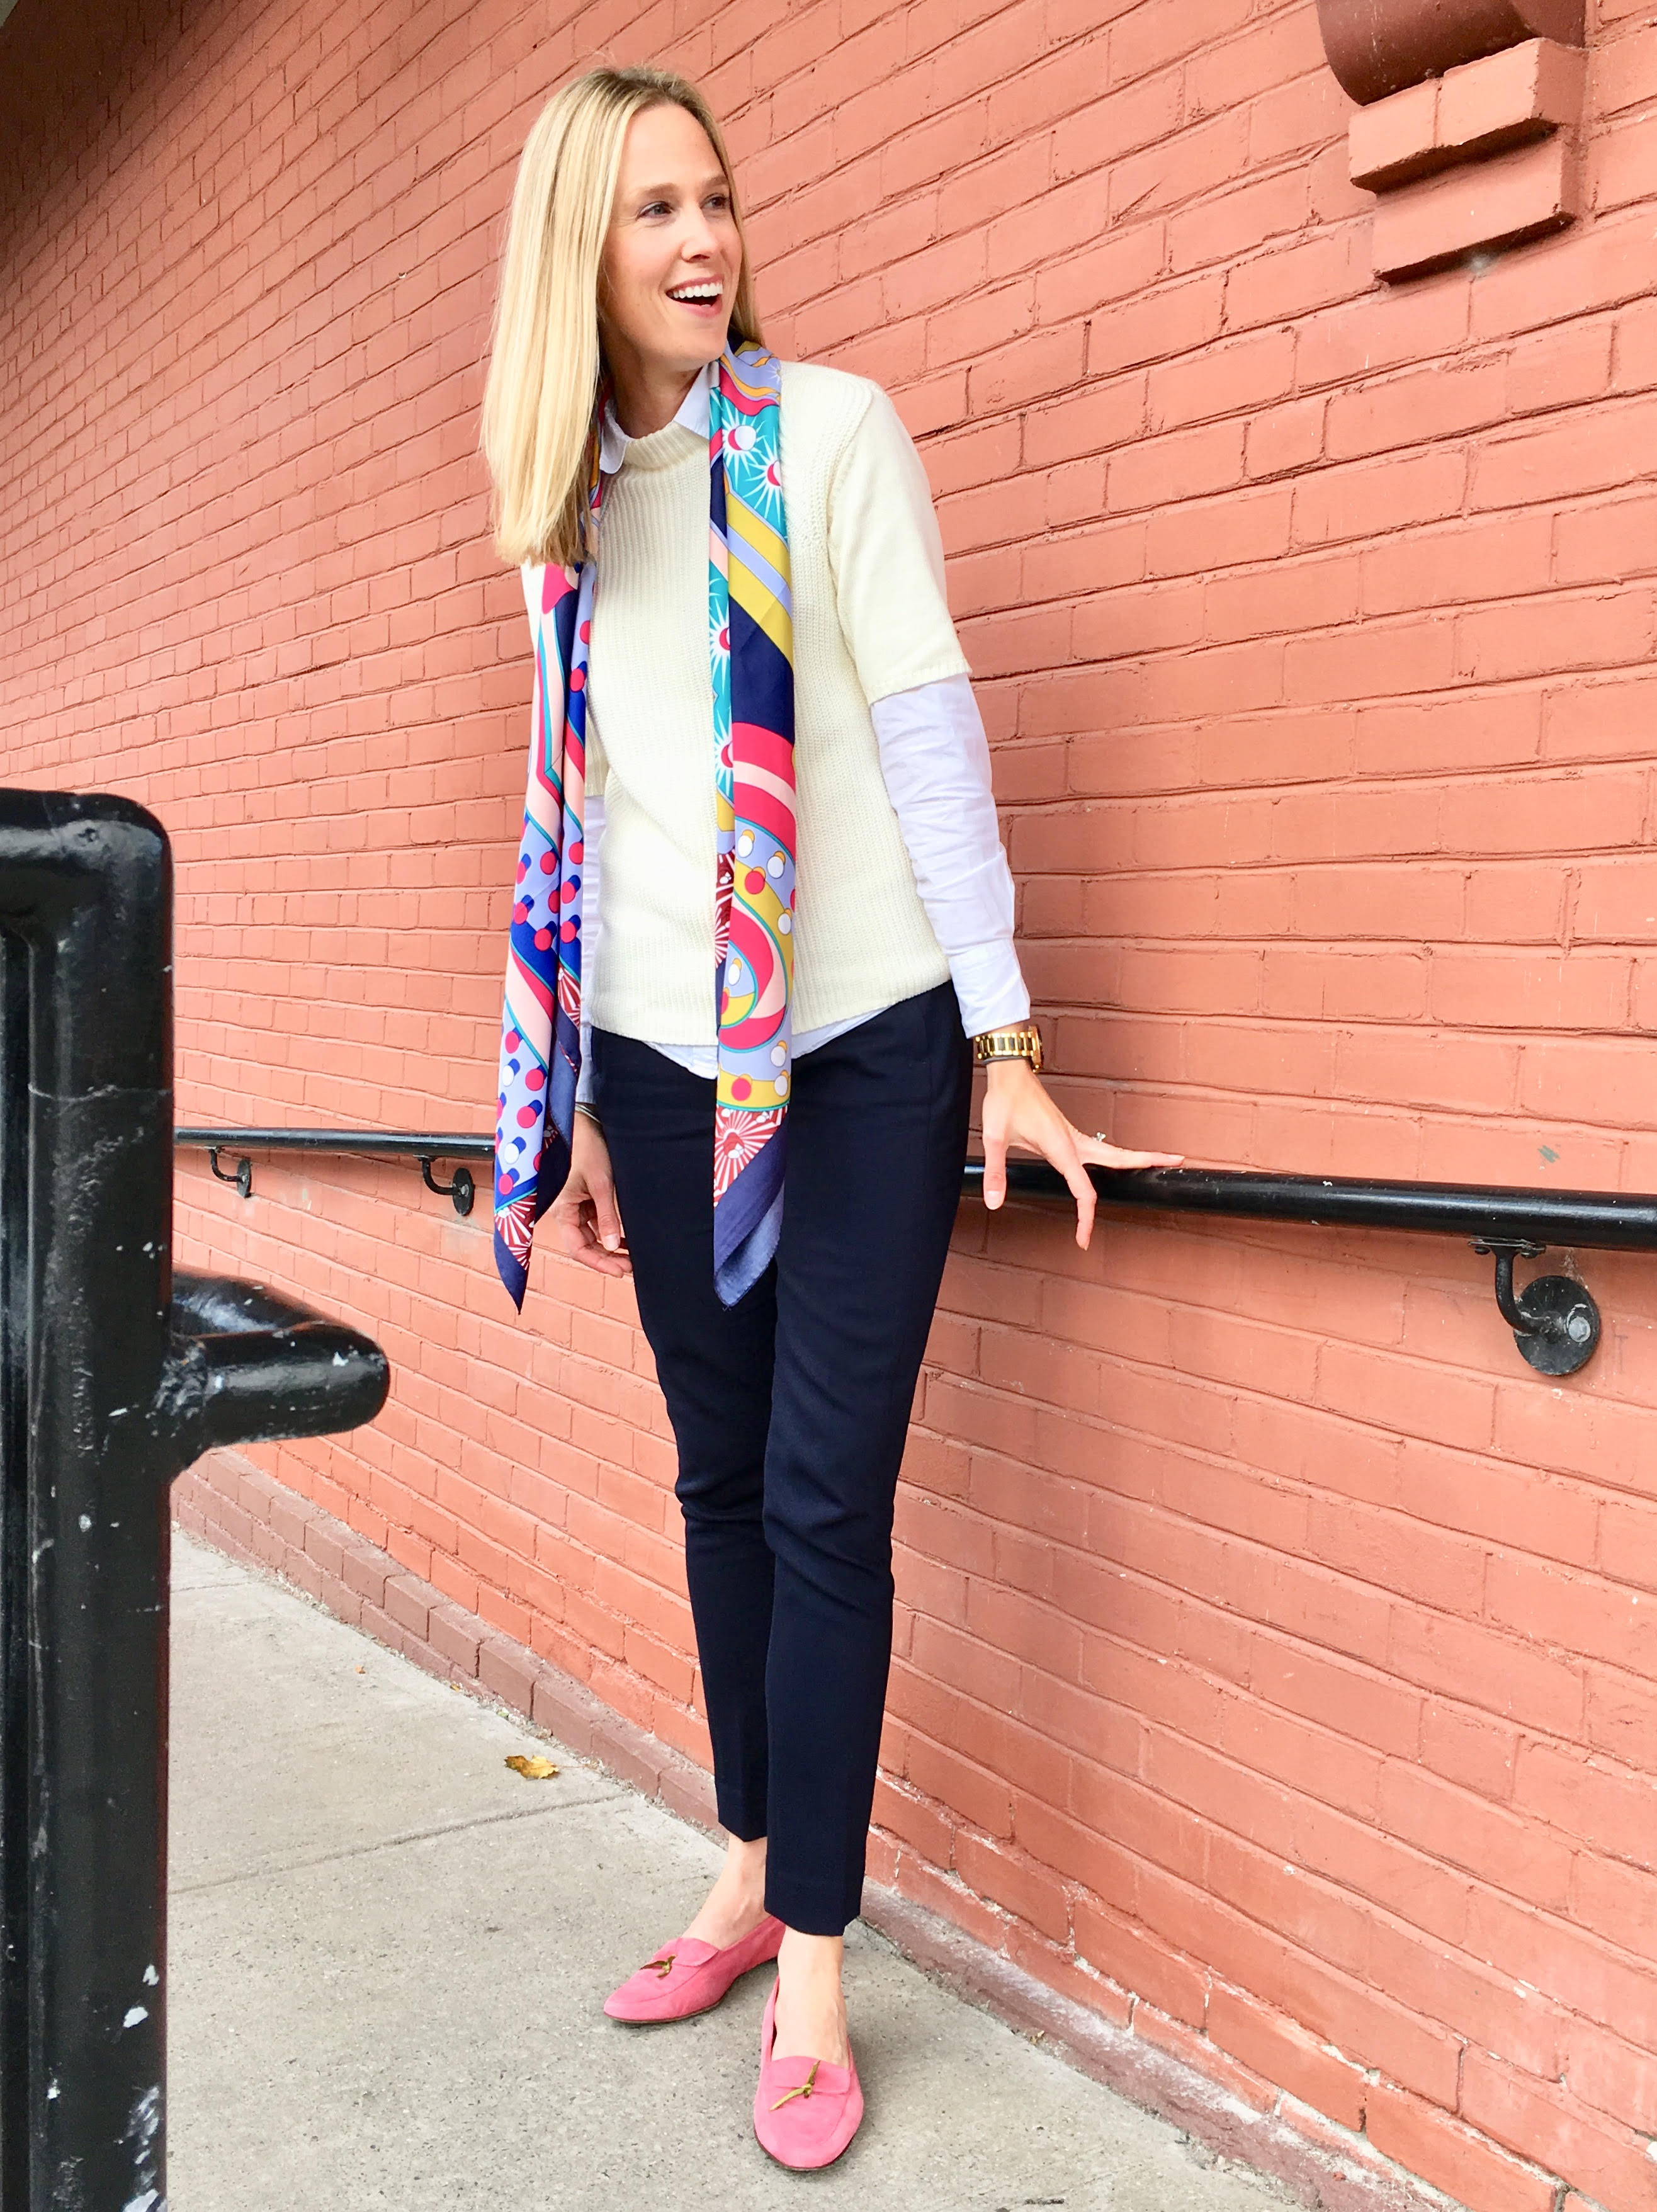 Fall-lilworkstyle-MonelleVT Scarf Full